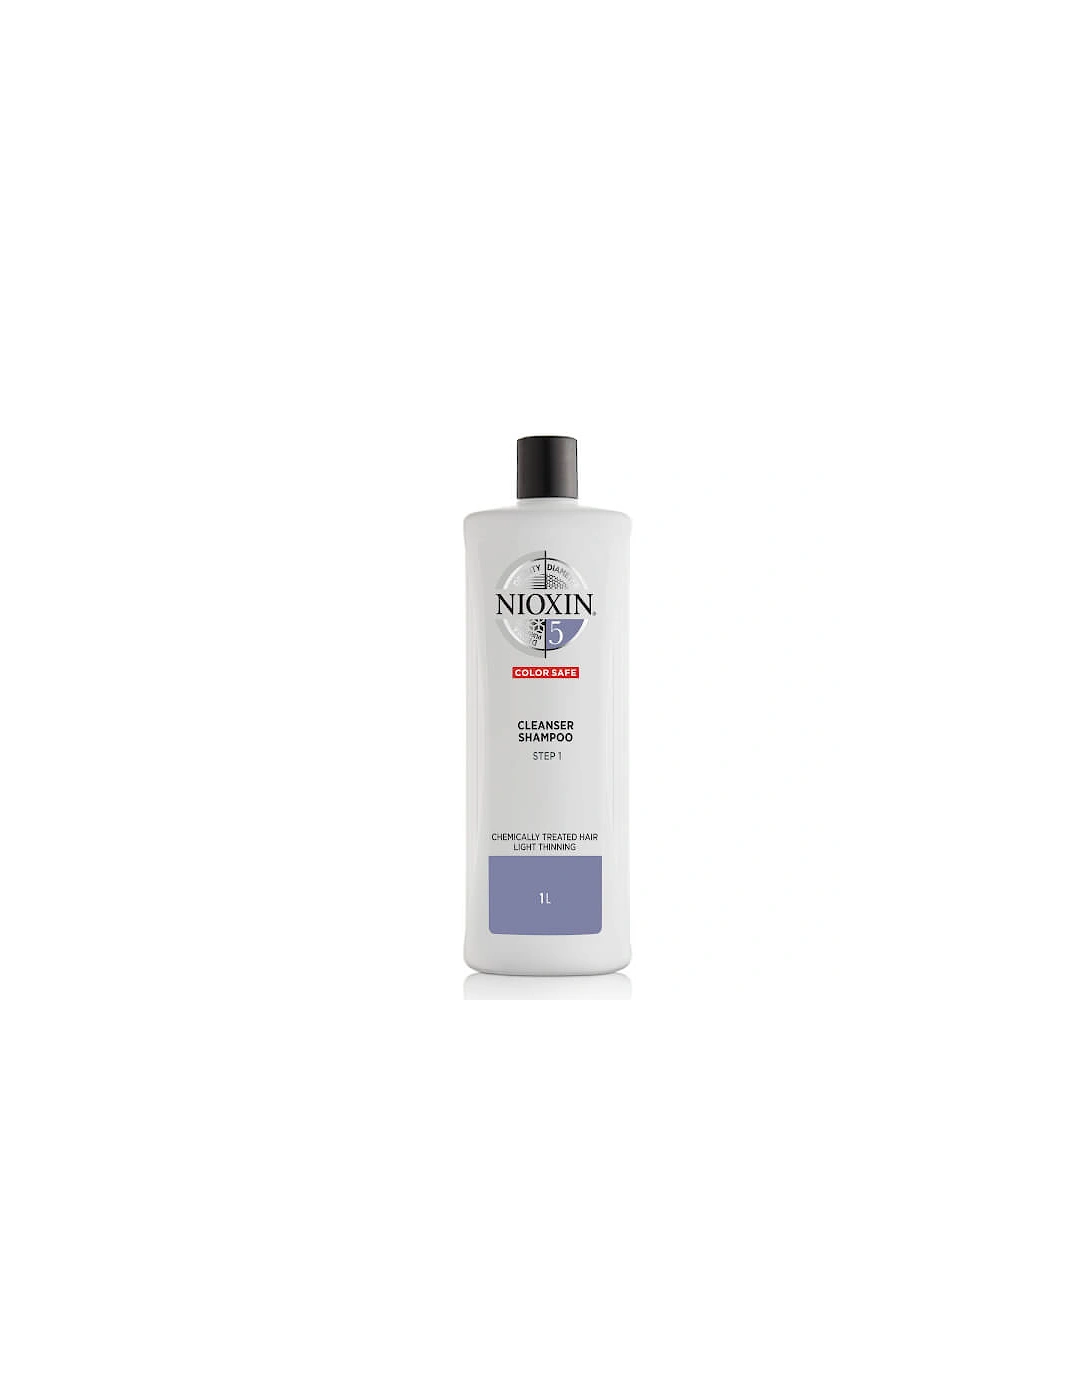 3-Part System 5 Cleanser Shampoo for Chemically Treated Hair with Light Thinning 1000ml - NIOXIN, 2 of 1